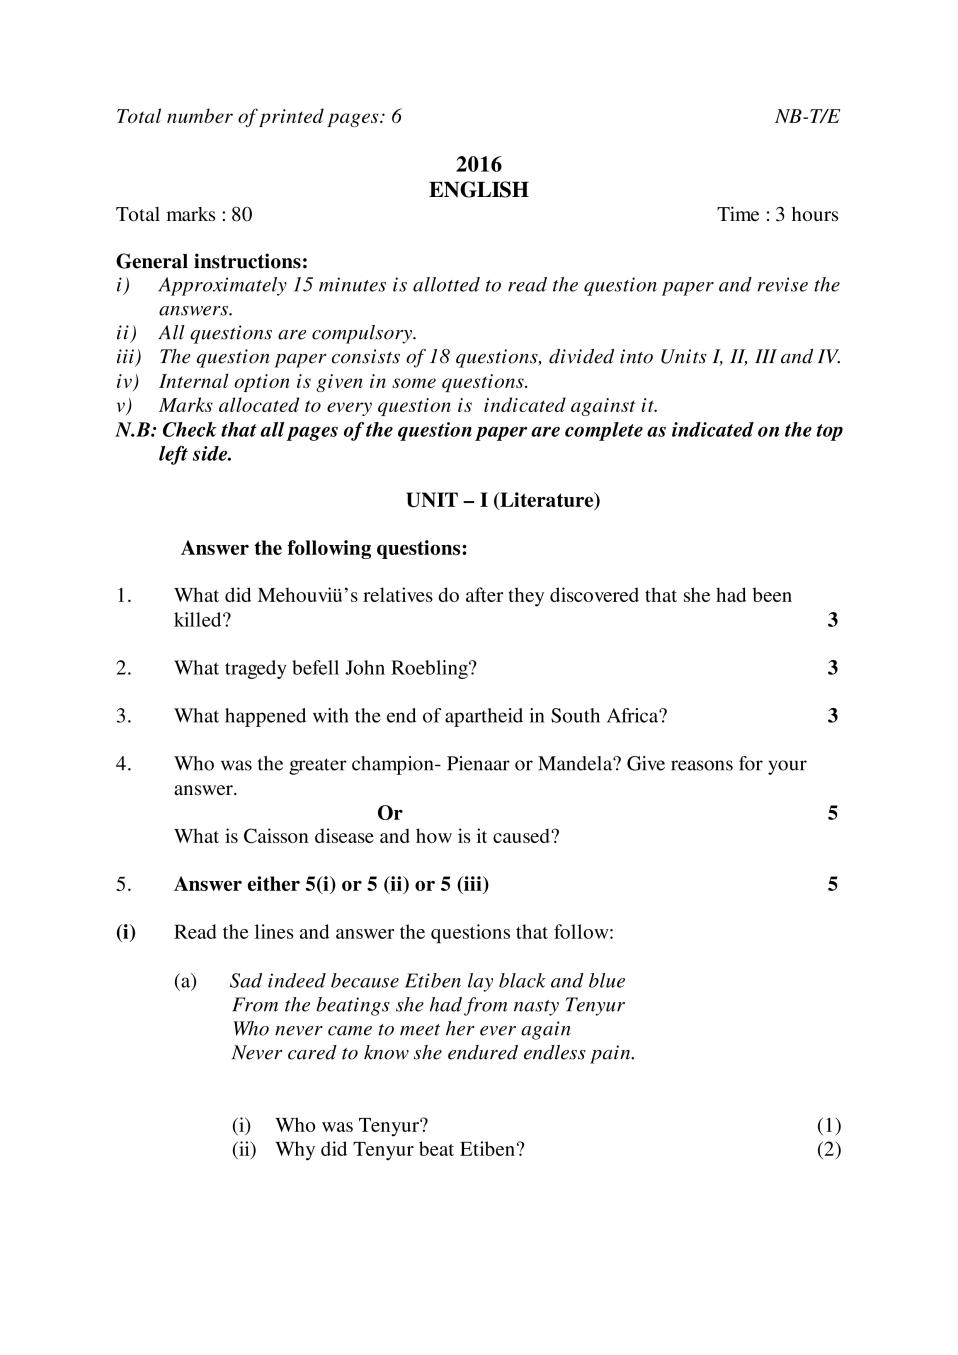 NBSE Class 10 Question Paper 2016 for English - Page 1